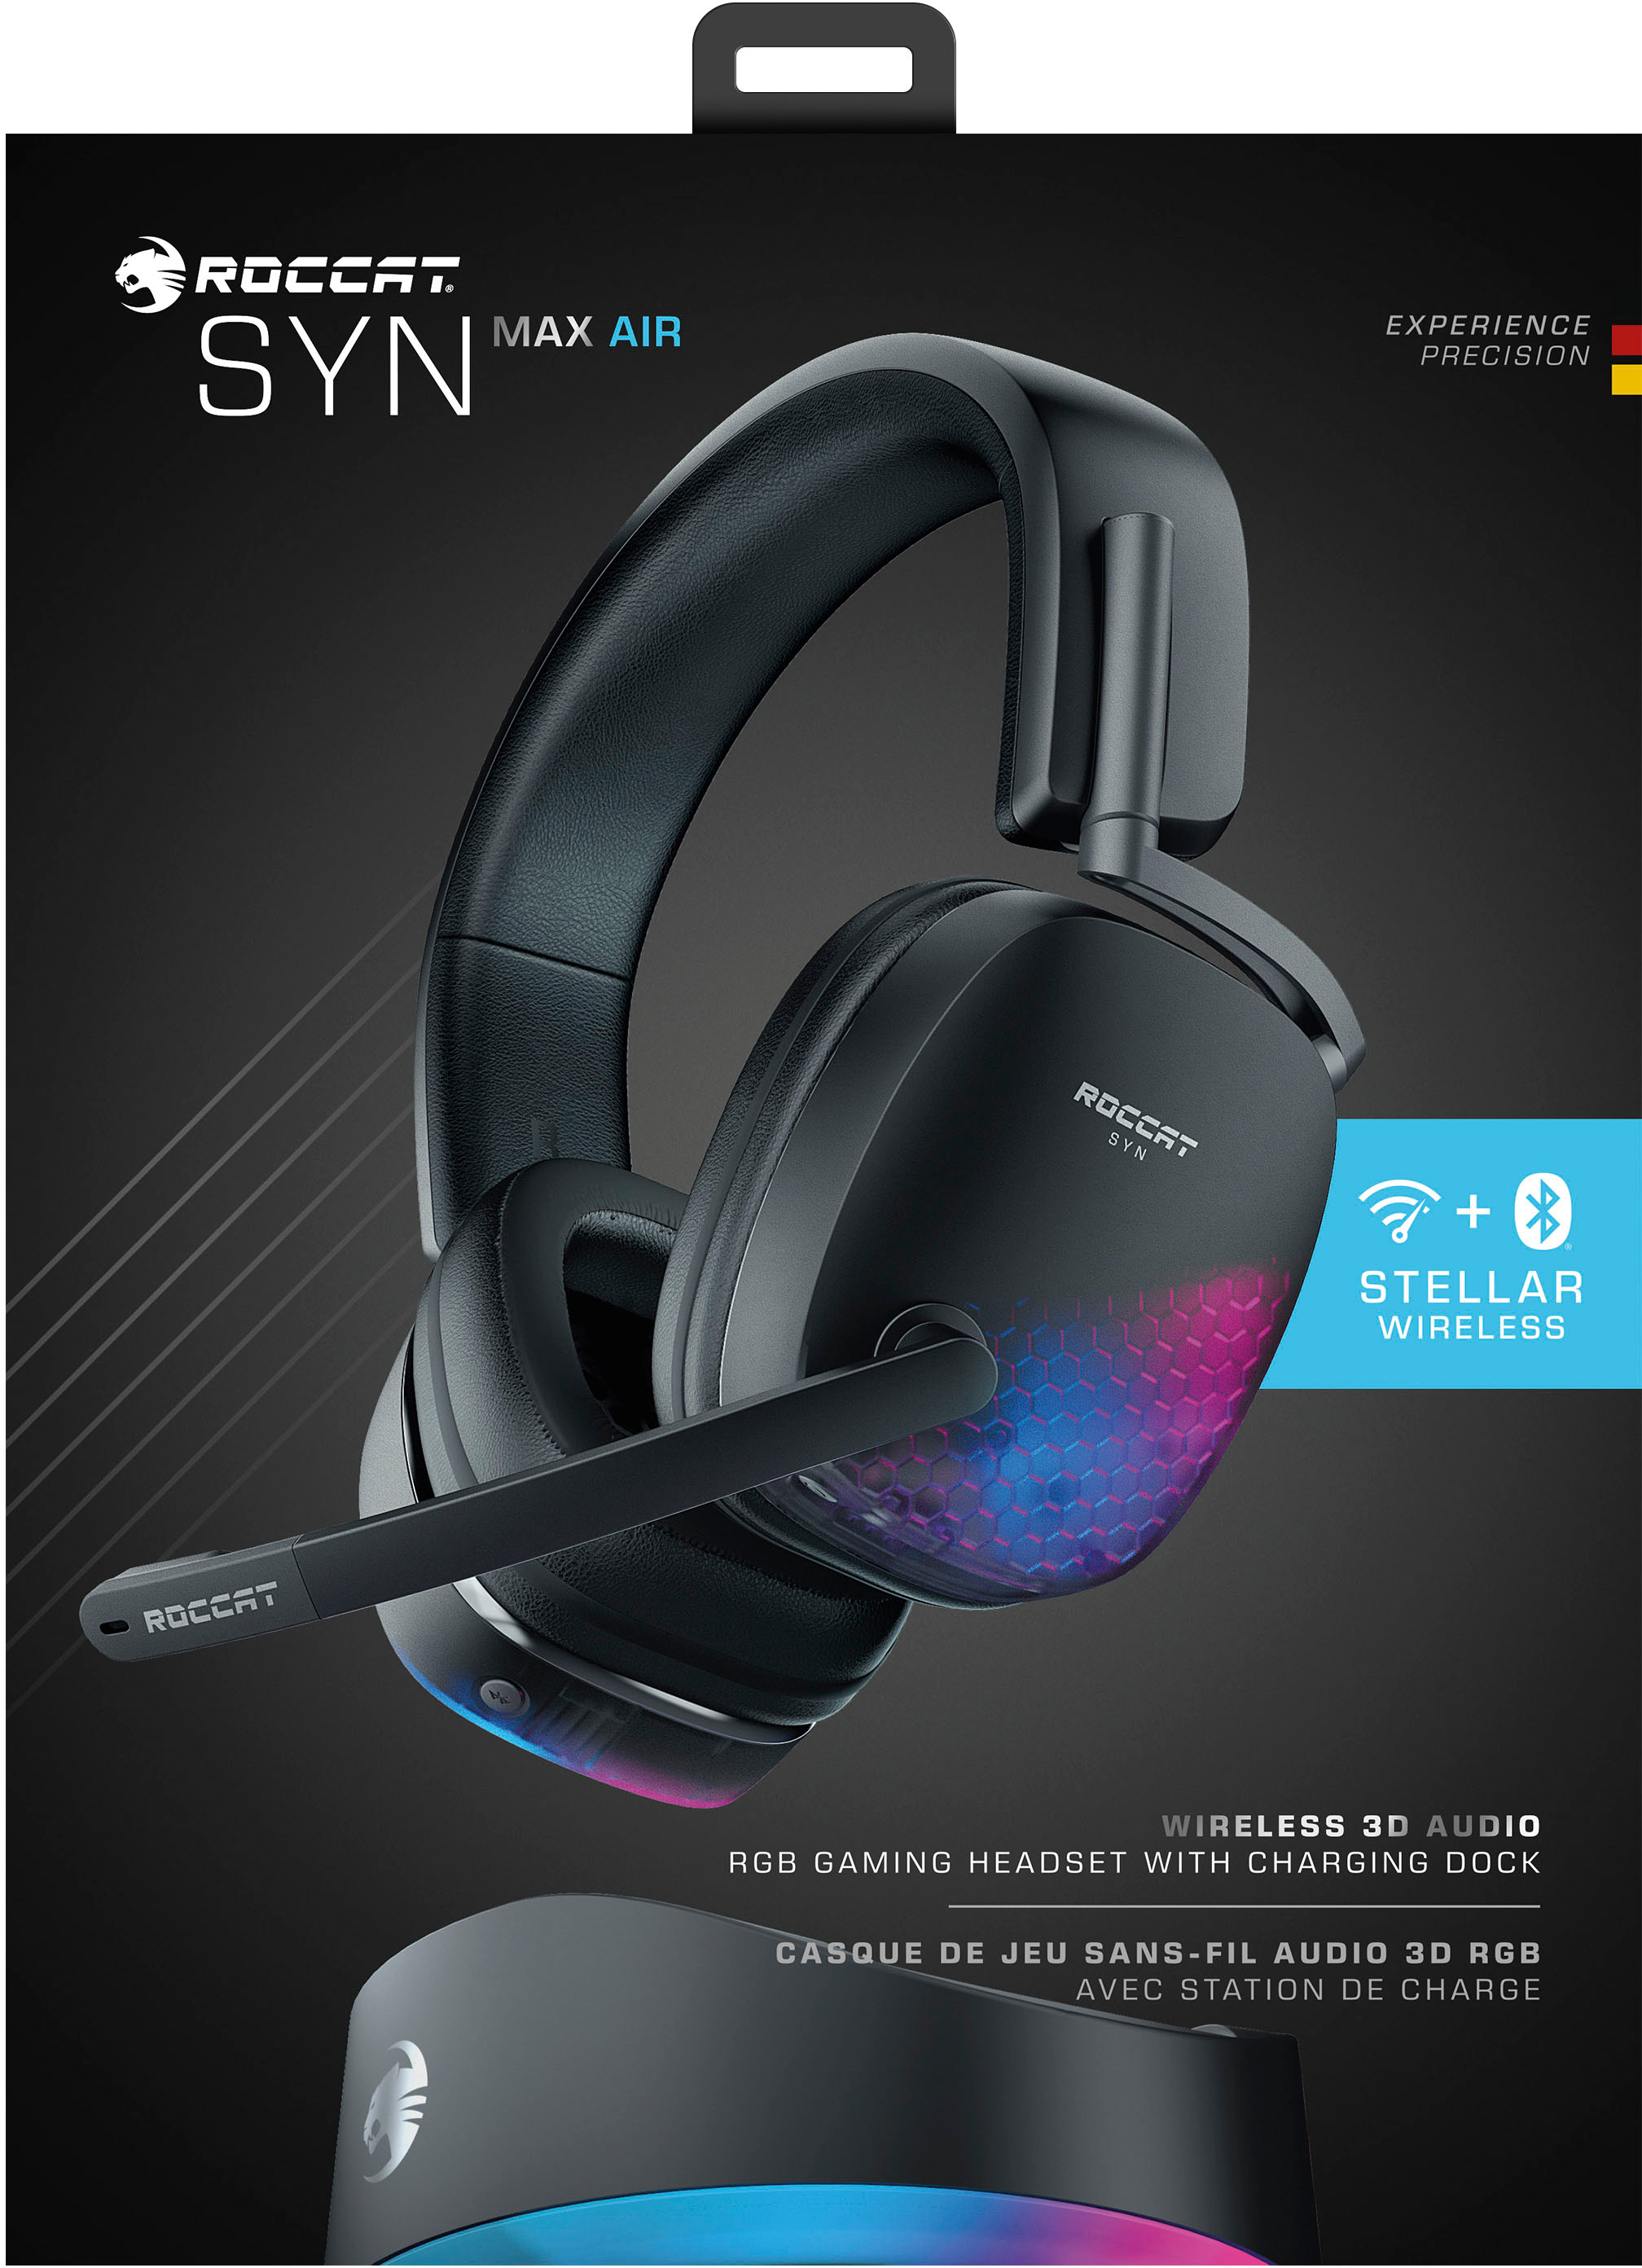 PC Wireless - Max Black ROC-14-155-01 Headset Buy Gaming Air SYN for ROCCAT Best